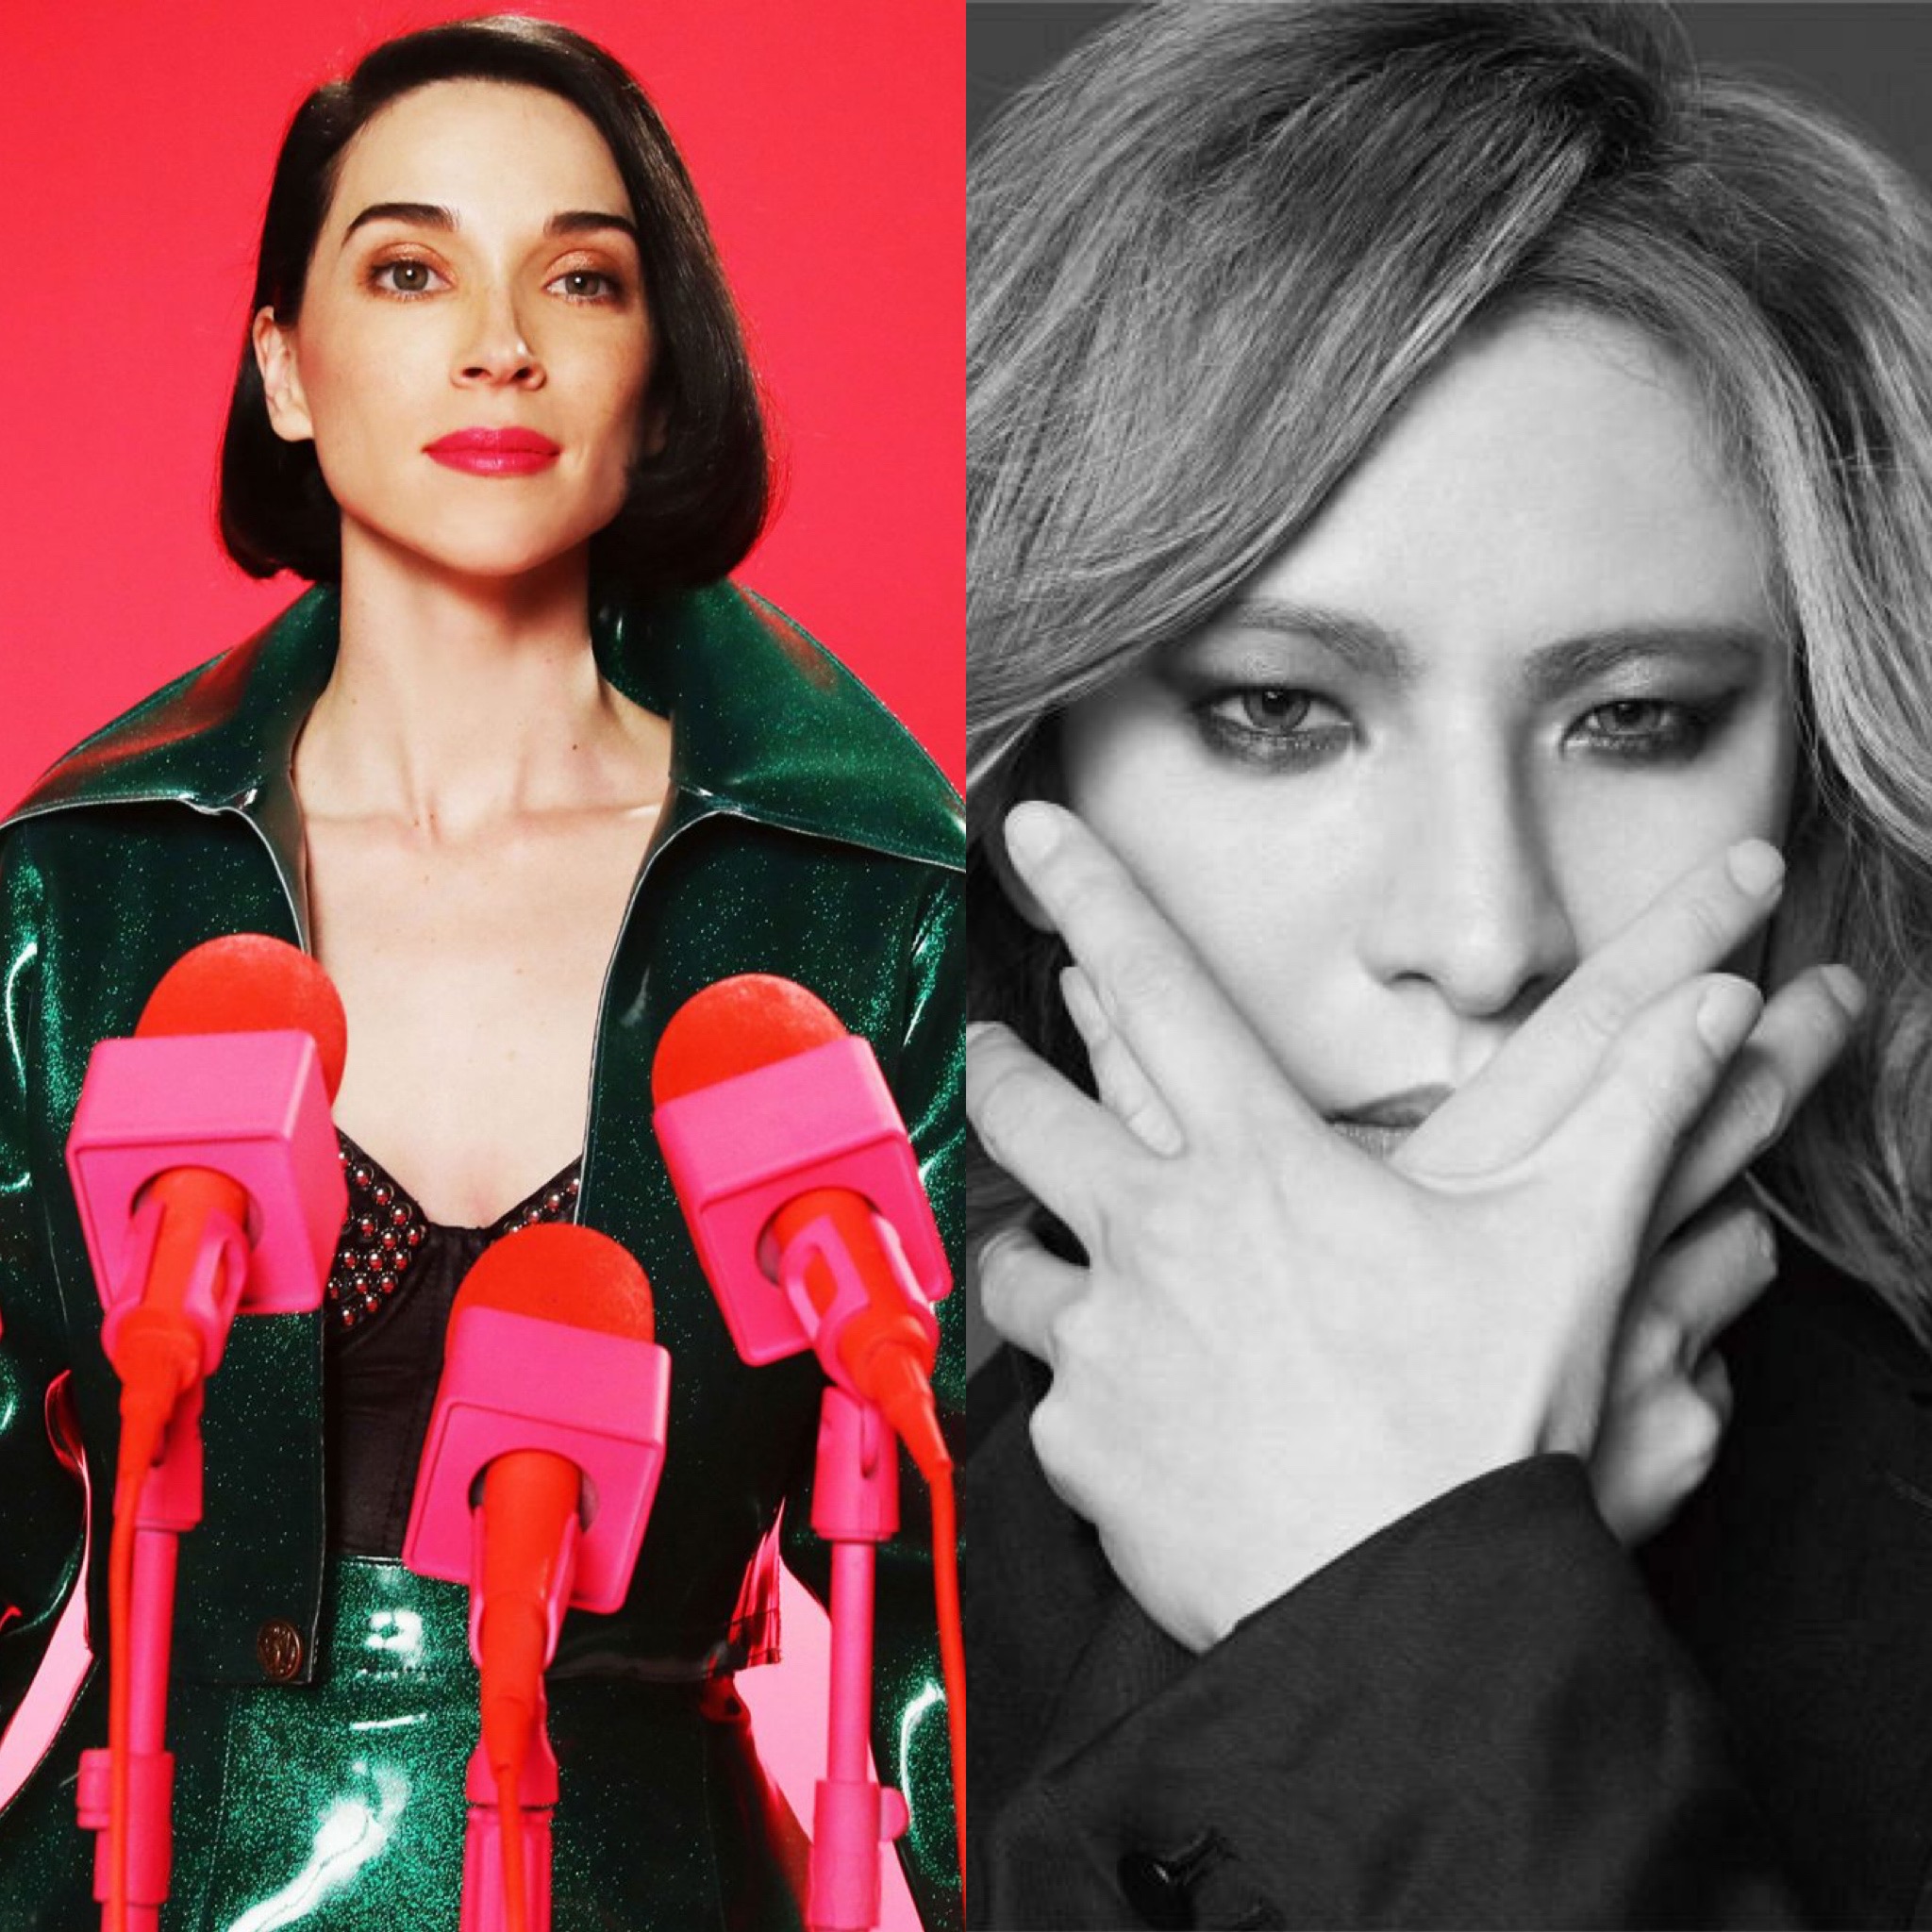 St. Vincent teams up with YOSHIKI for new version of “New York”